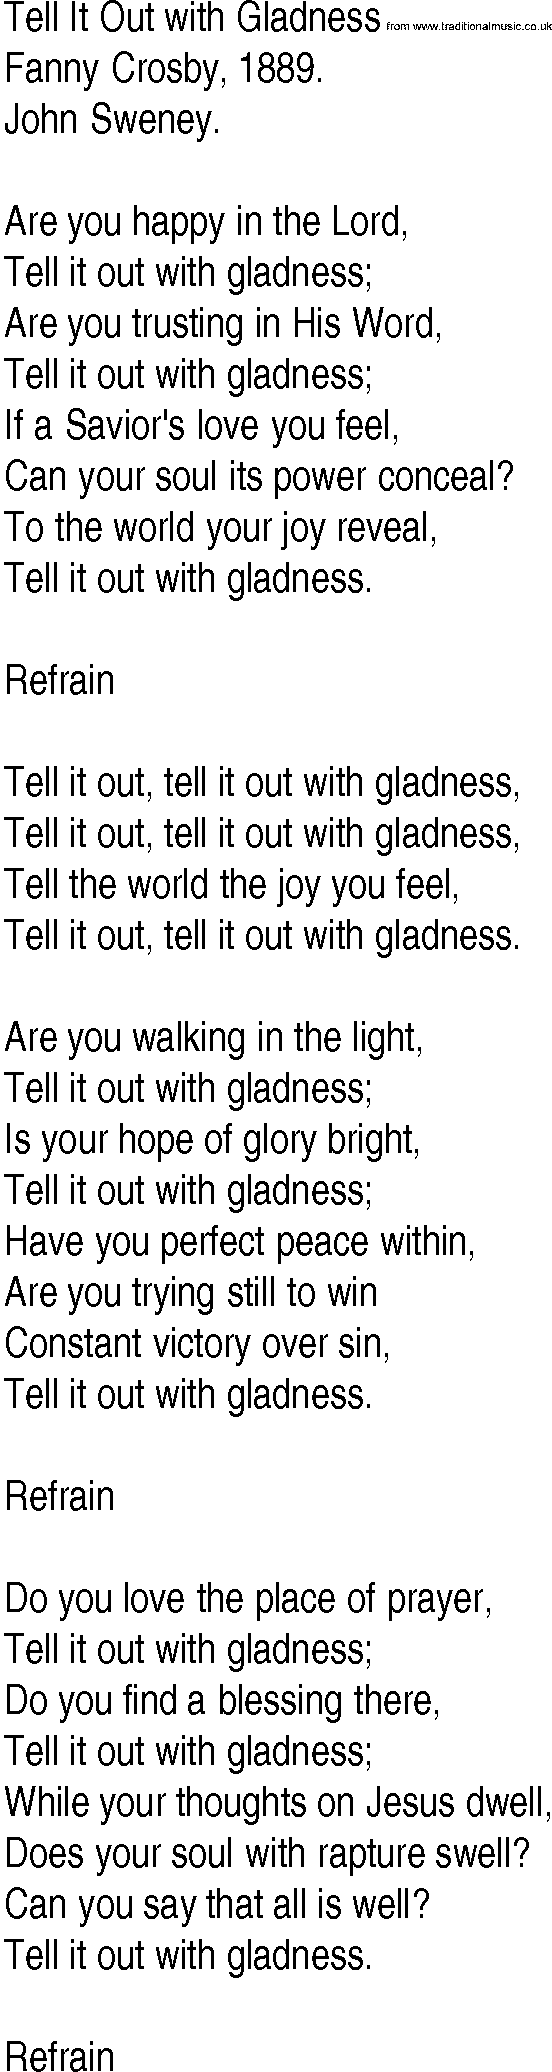 Hymn and Gospel Song: Tell It Out with Gladness by Fanny Crosby lyrics